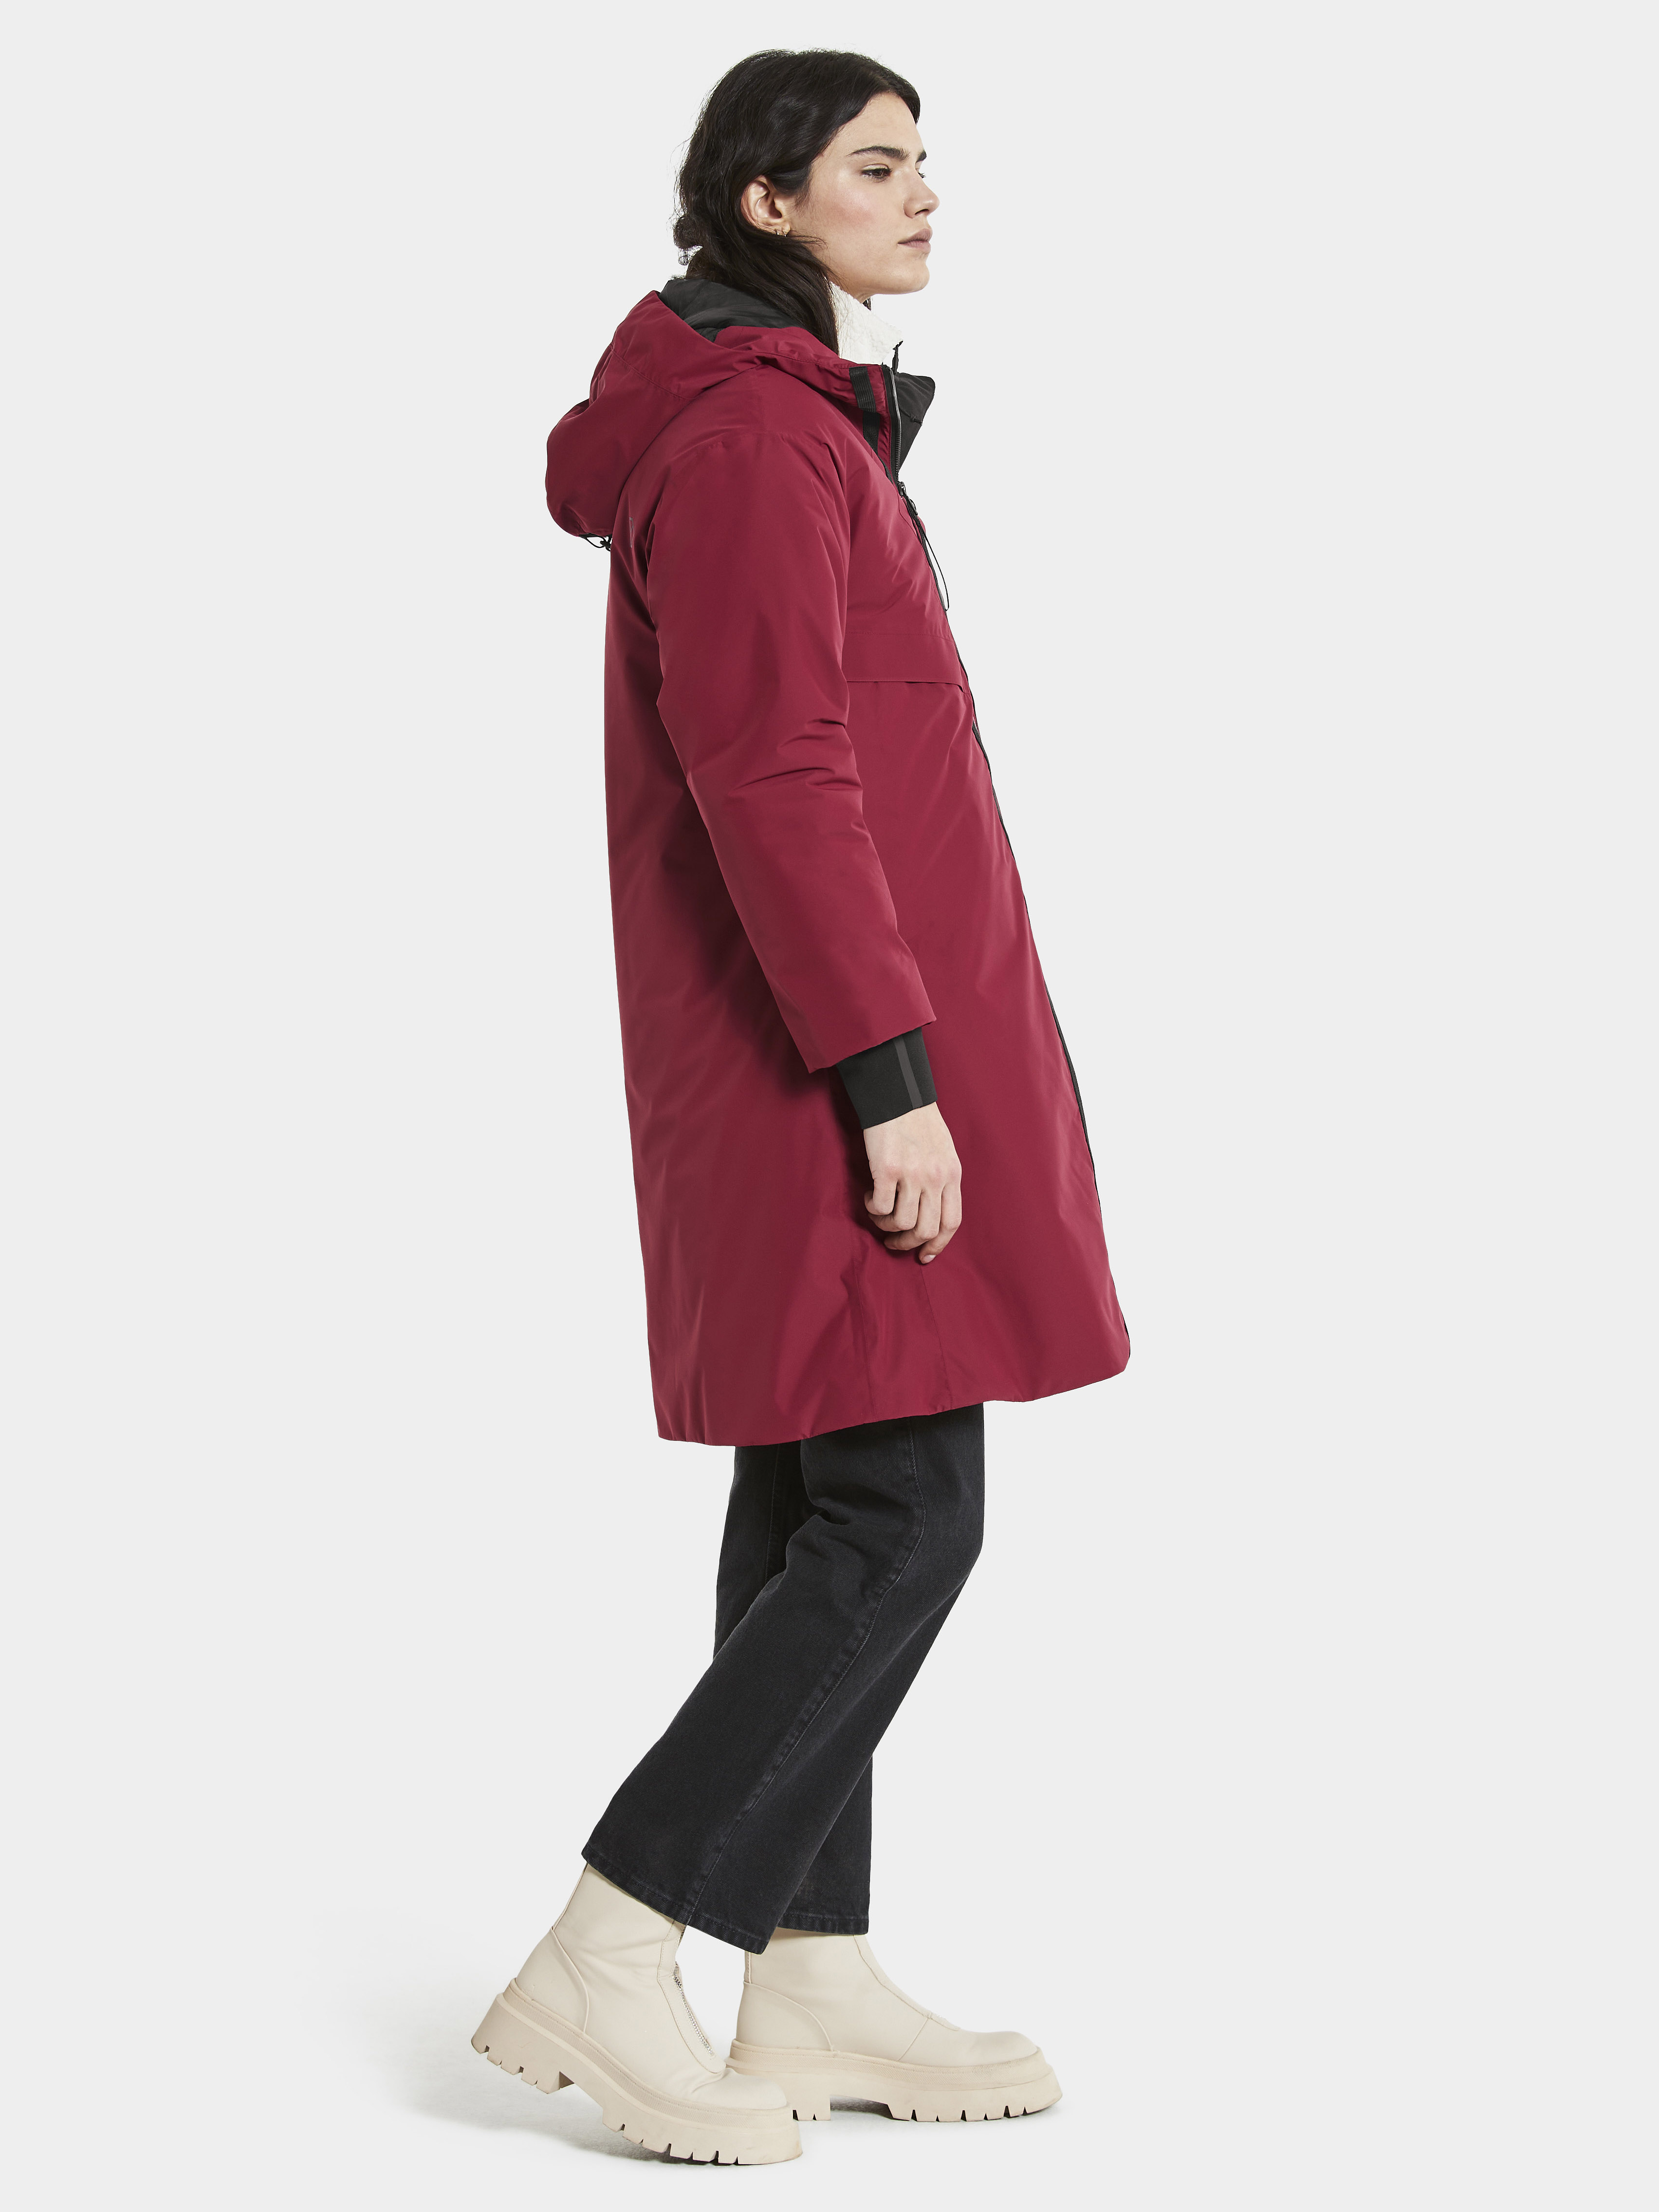 Aino Women's Parka 4 Ruby Red | Buy Aino Women's Parka 4 Ruby Red here |  Outnorth